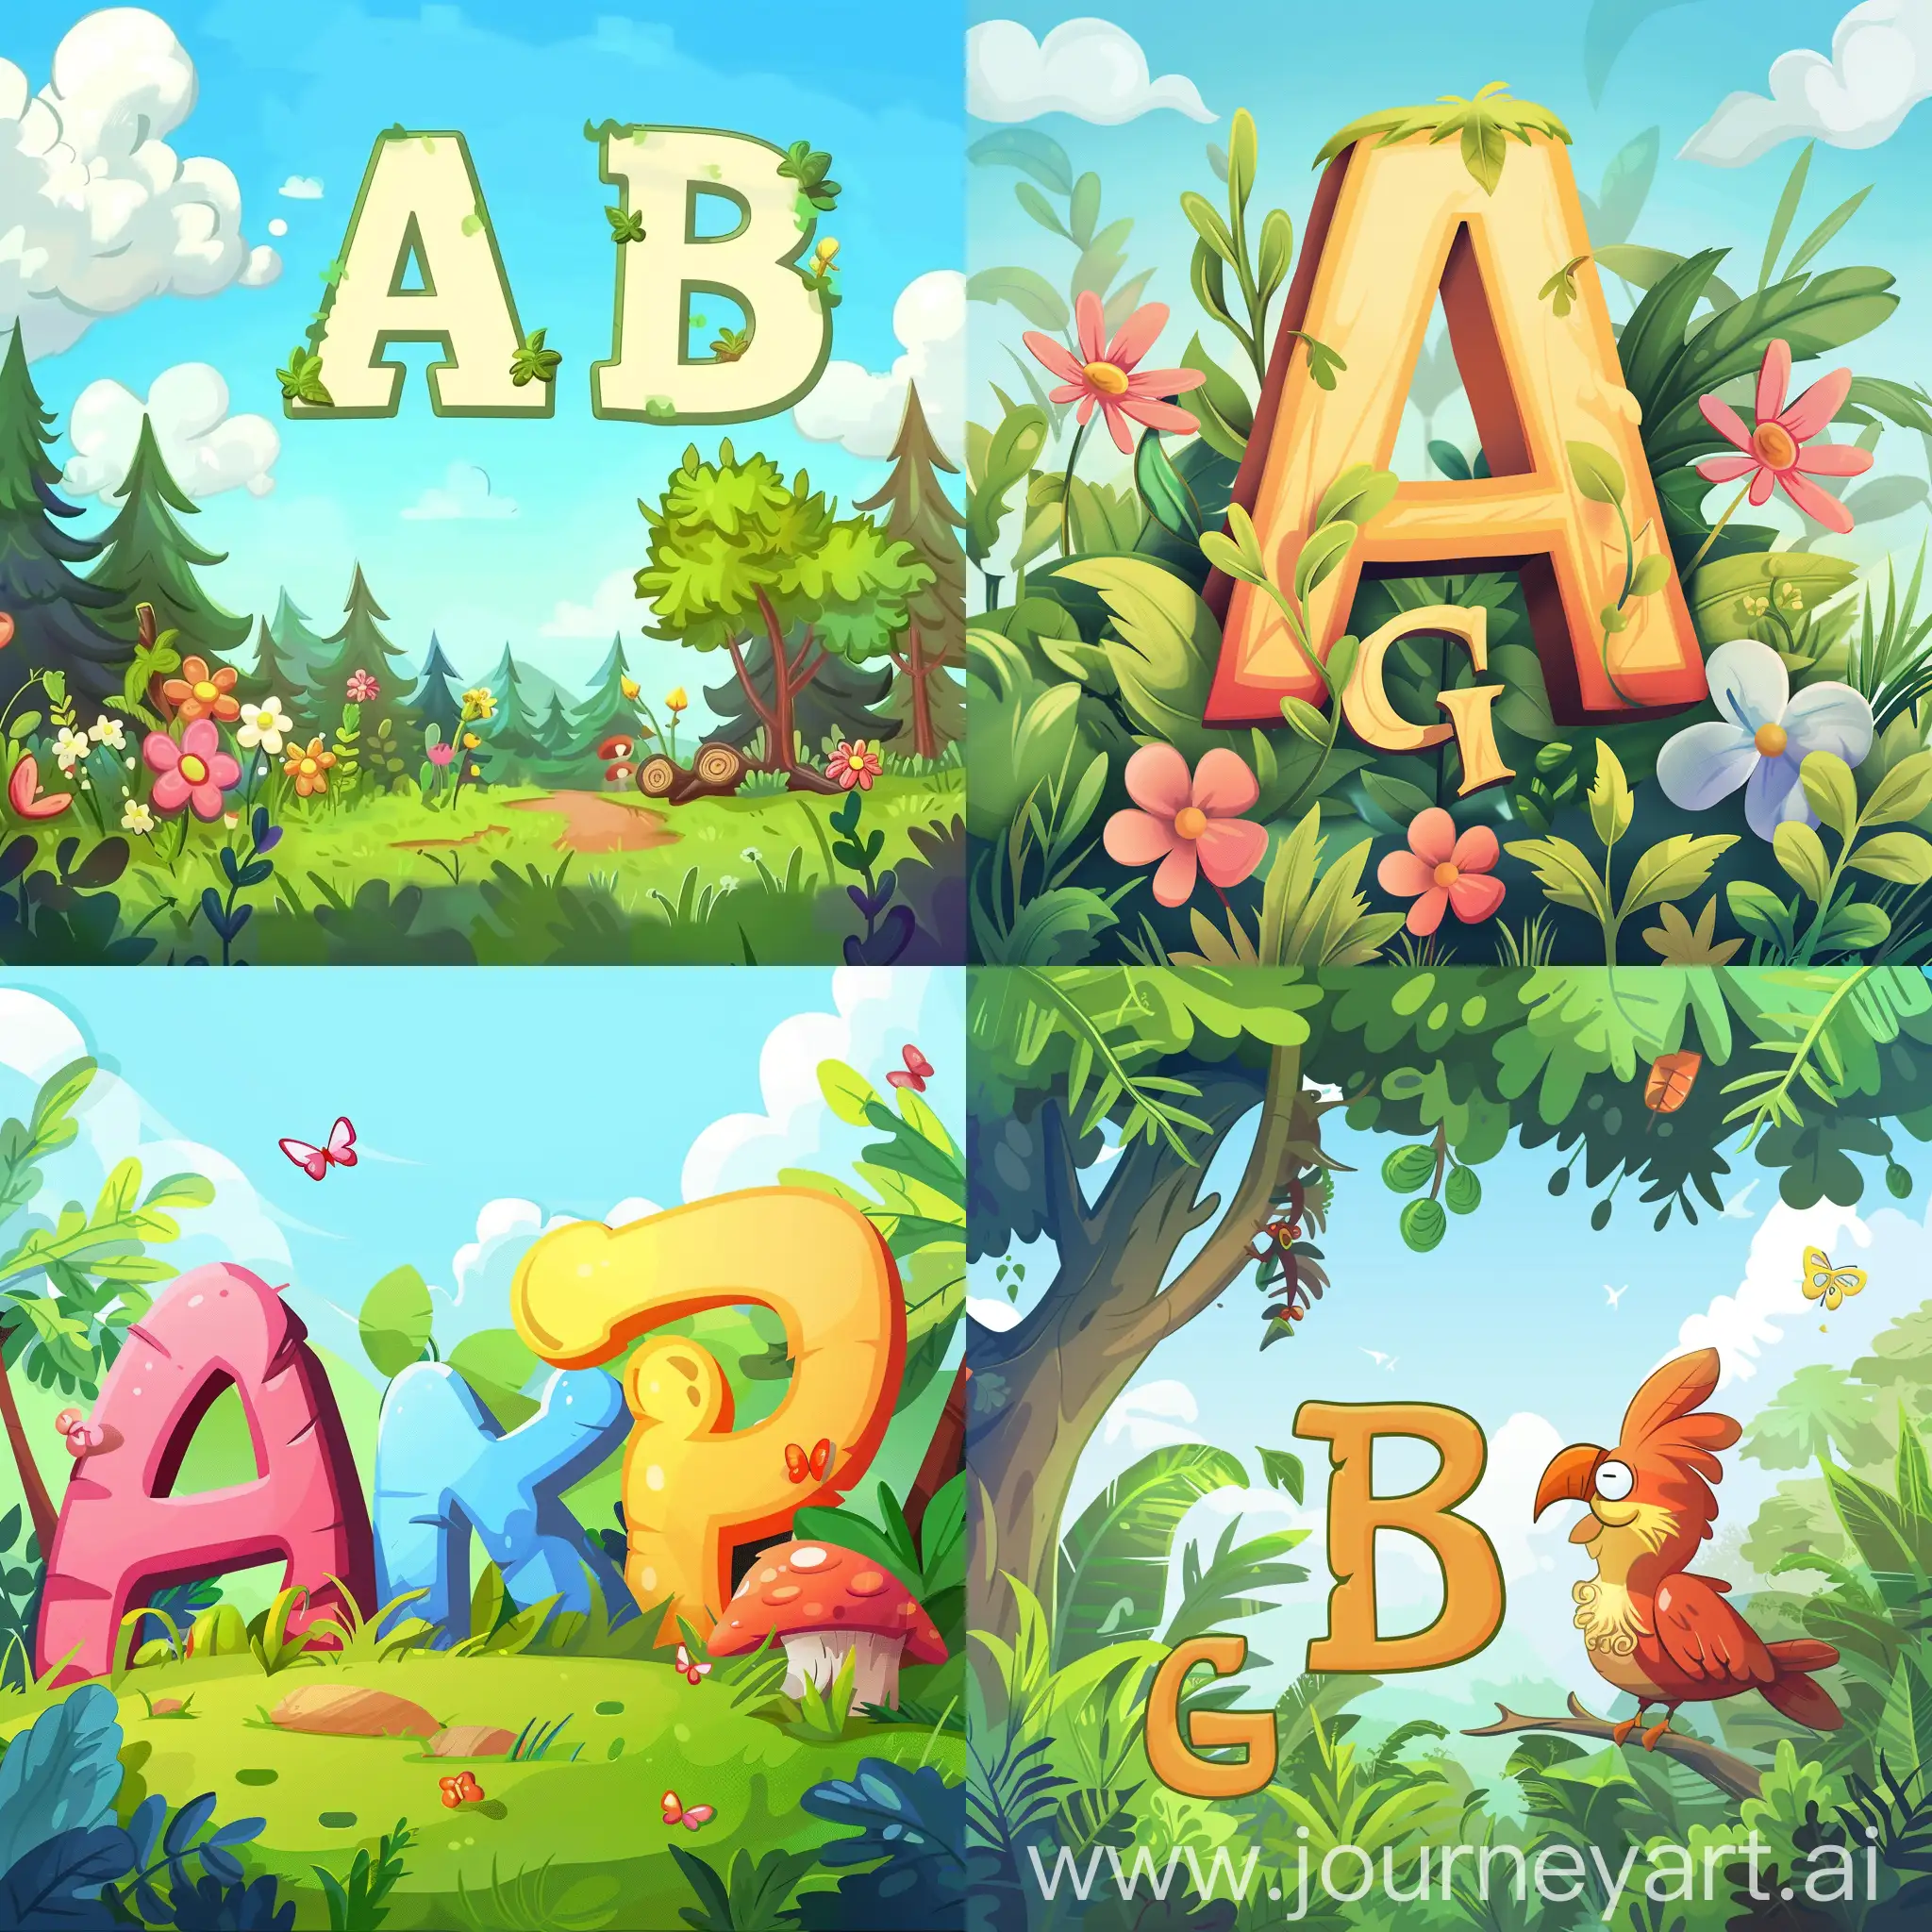 Childrens-Cartoon-Style-Alphabet-Game-with-Russian-Arial-Font-in-Nature